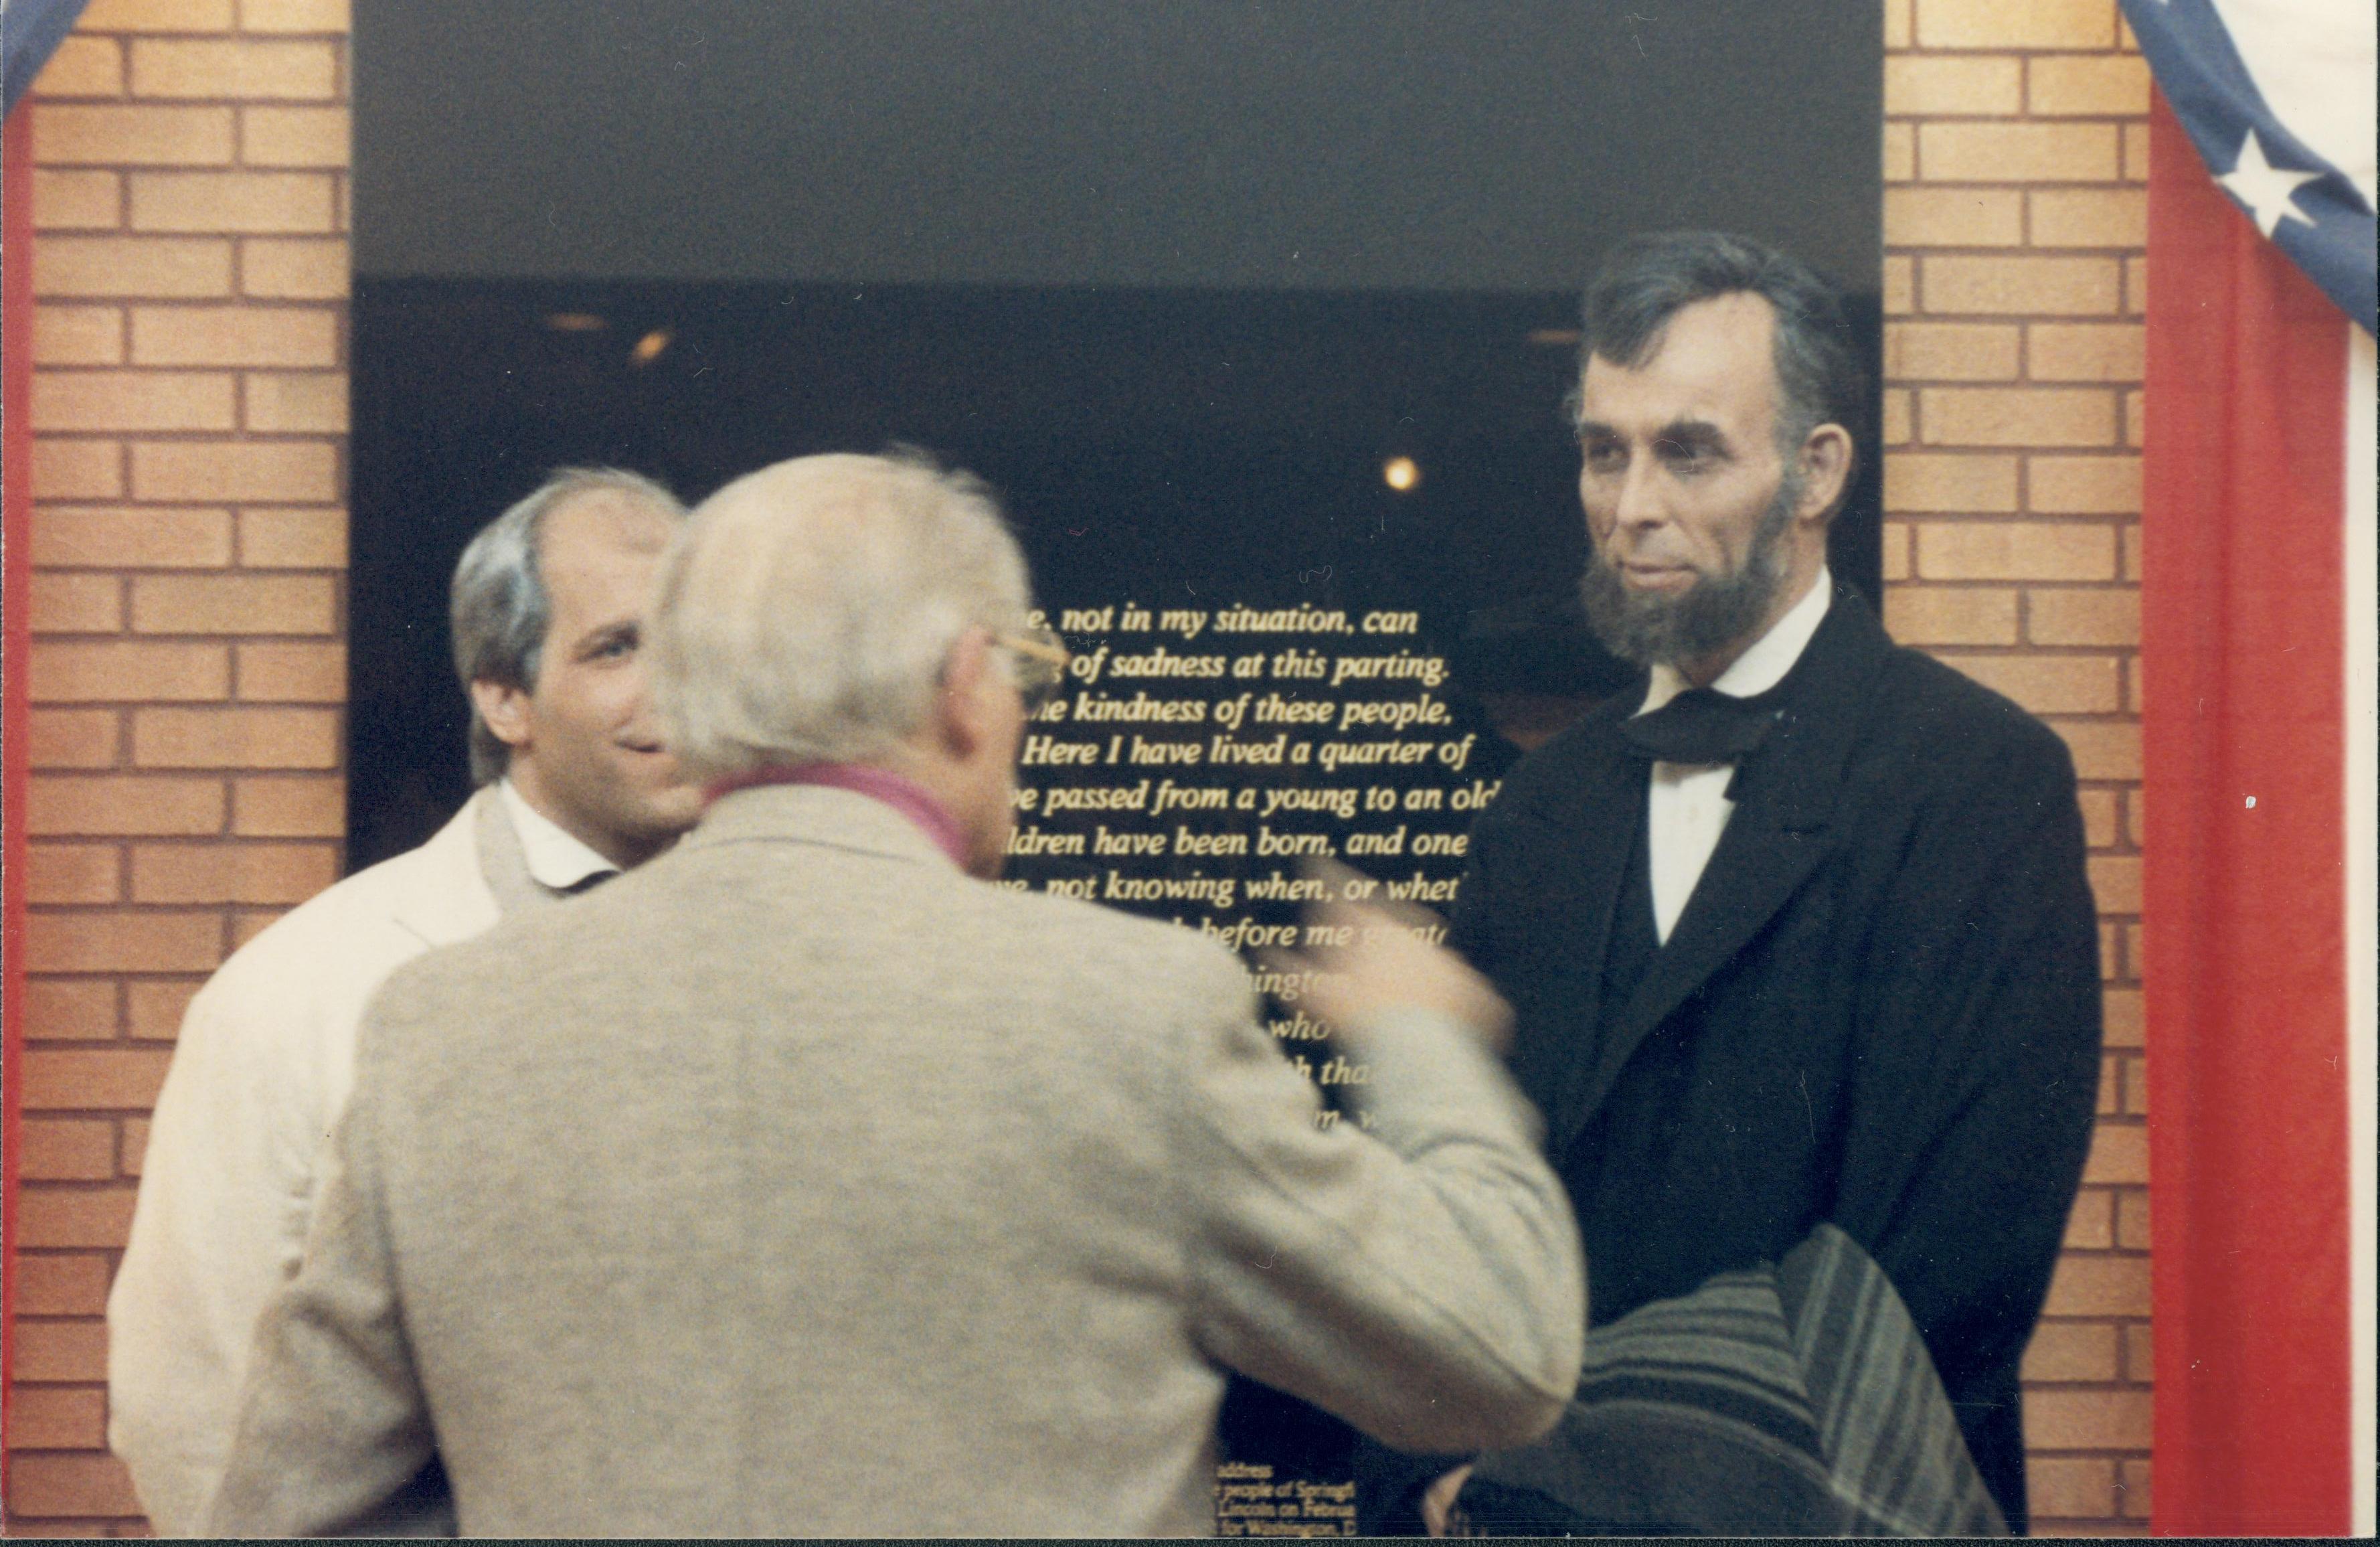 Man speaking to two impersonators. Lincoln Home NHS- Lincoln's Birthday 1988 birthday, Lincoln, Douglas